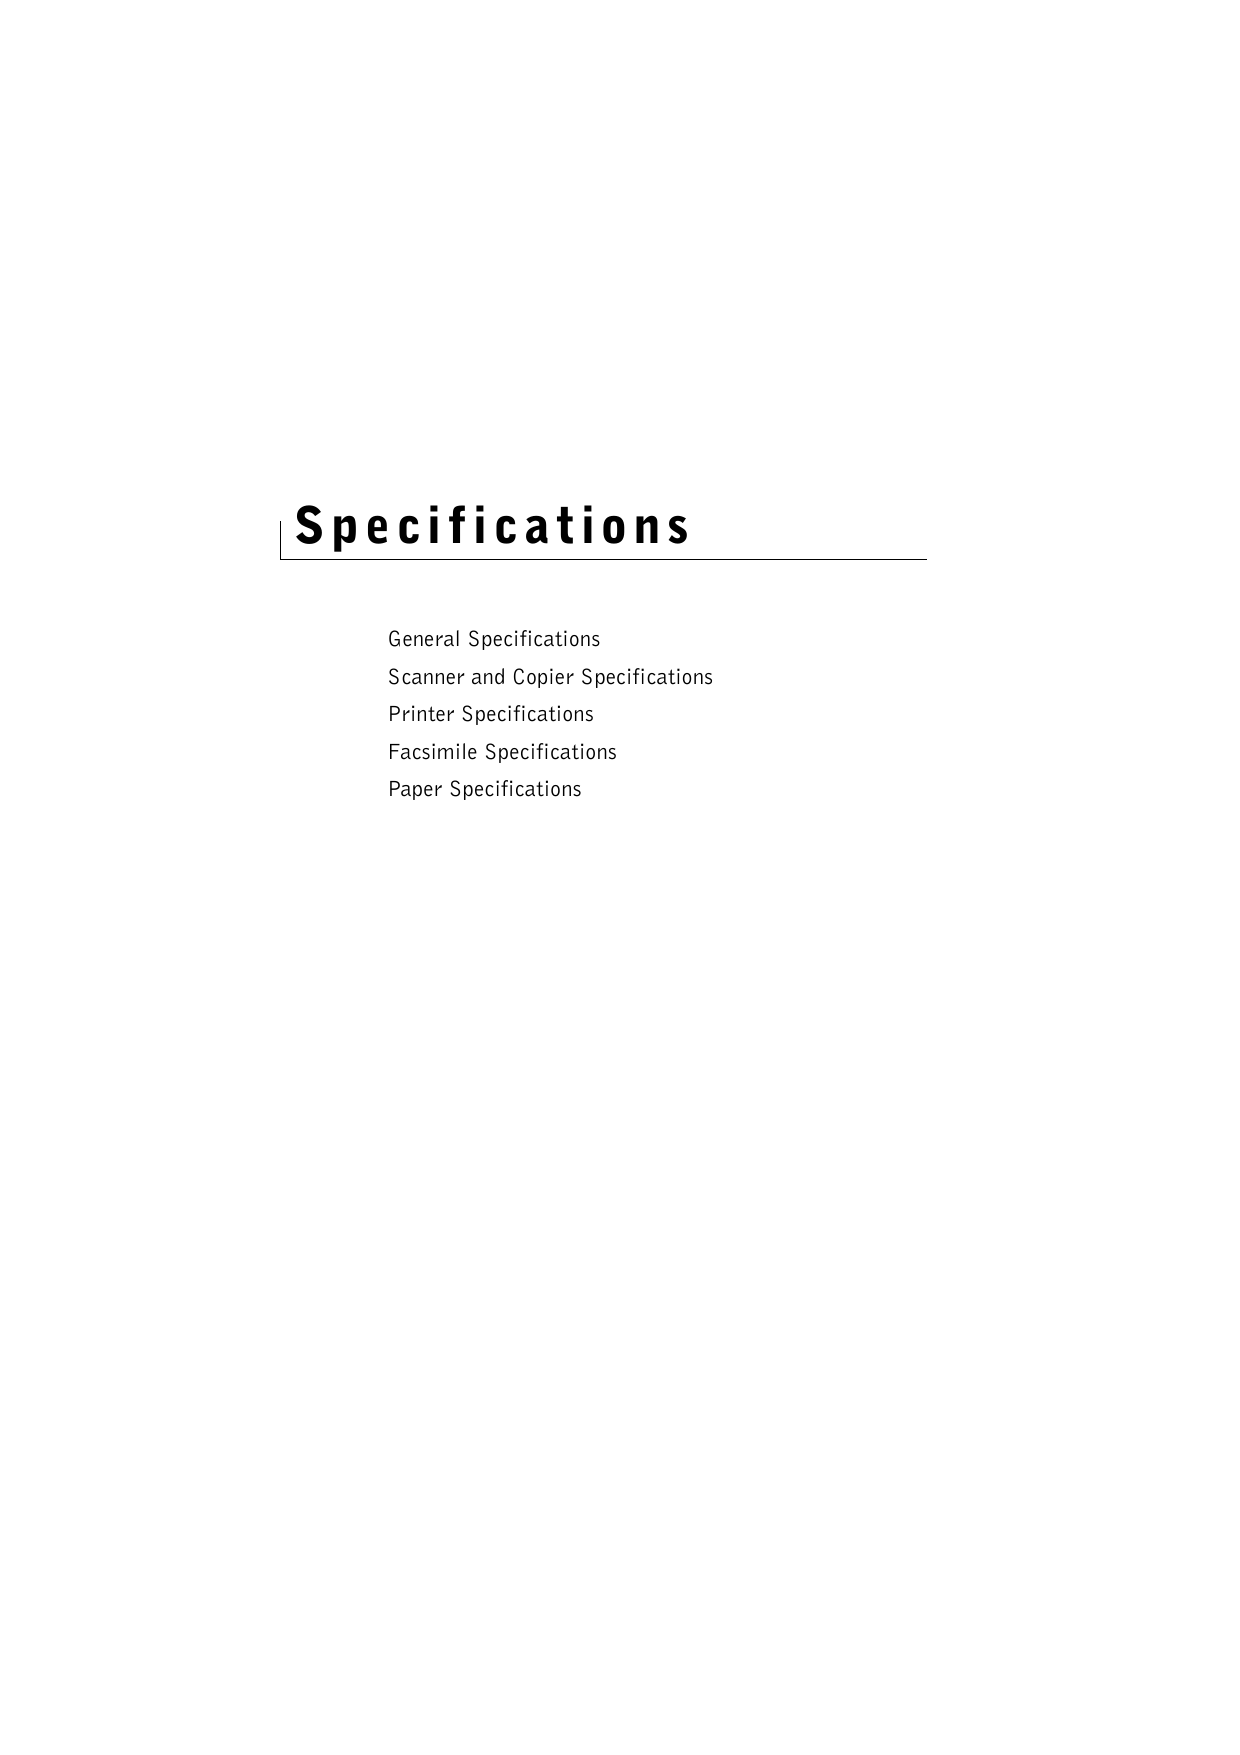 SpecificationsGeneral SpecificationsScanner and Copier SpecificationsPrinter SpecificationsFacsimile SpecificationsPaper Specifications